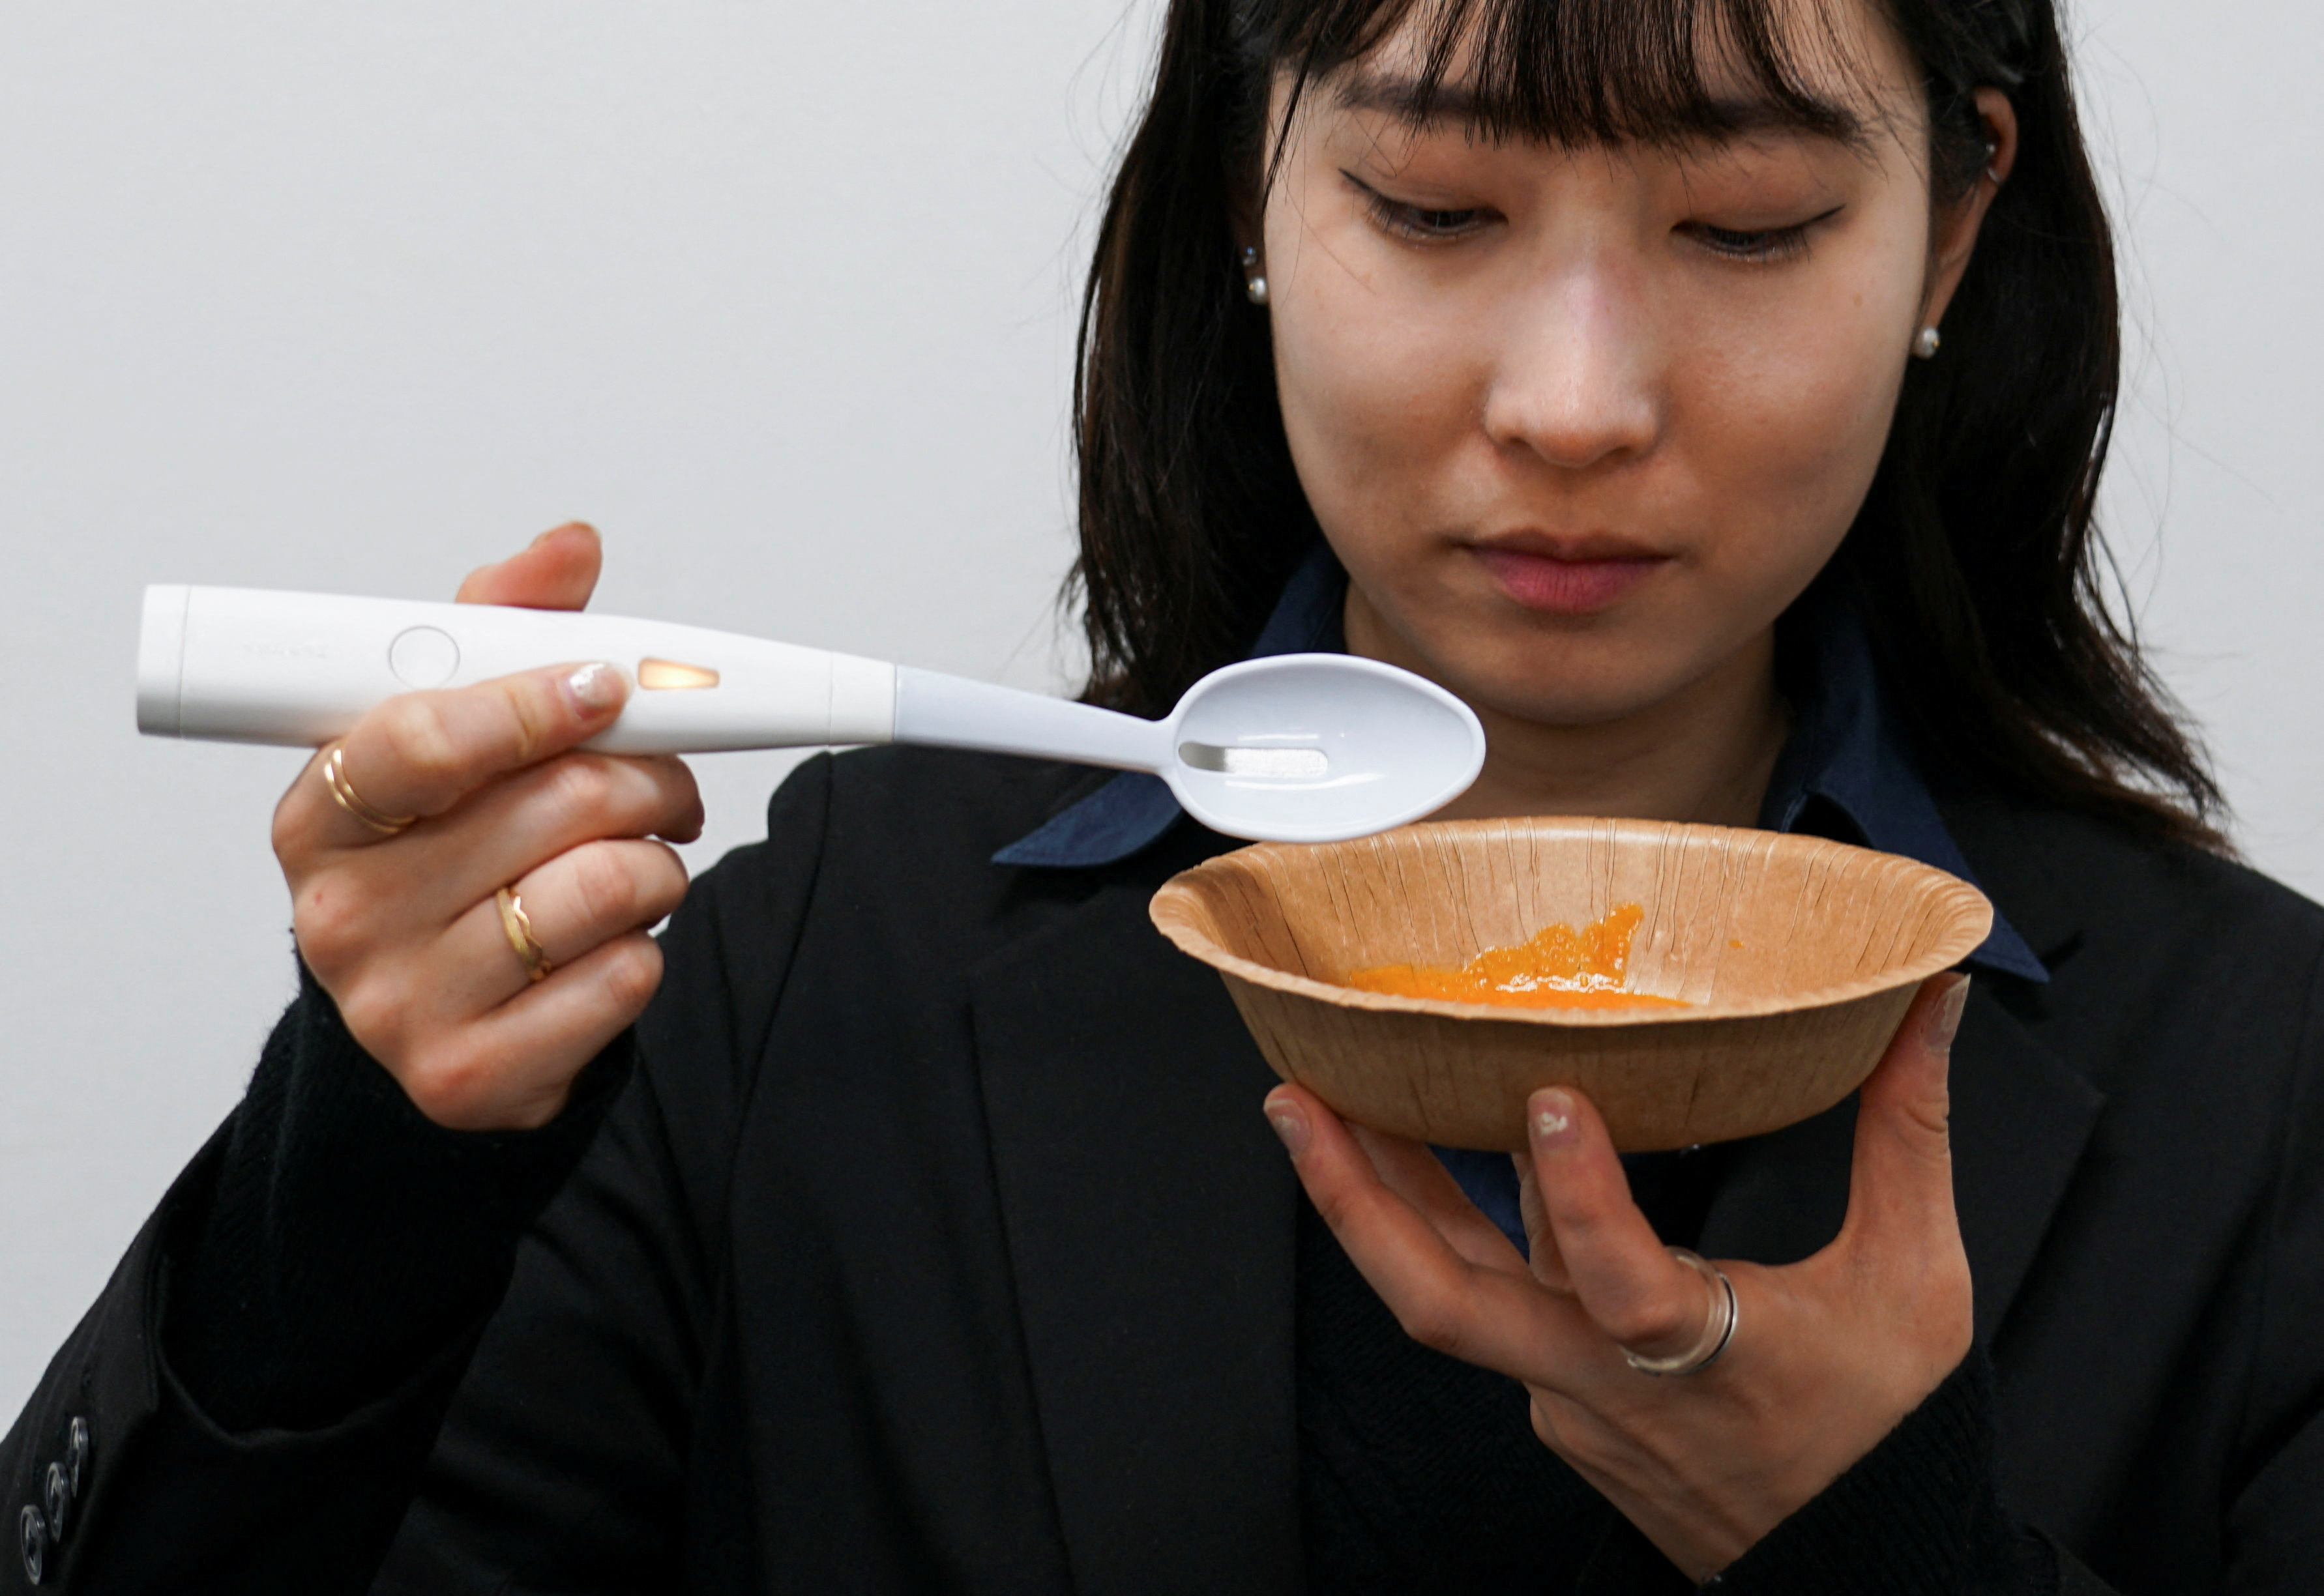 An employee of Kirin Holdings demonstrates an electric spoon that can enhance the salty taste in food, in Tokyo